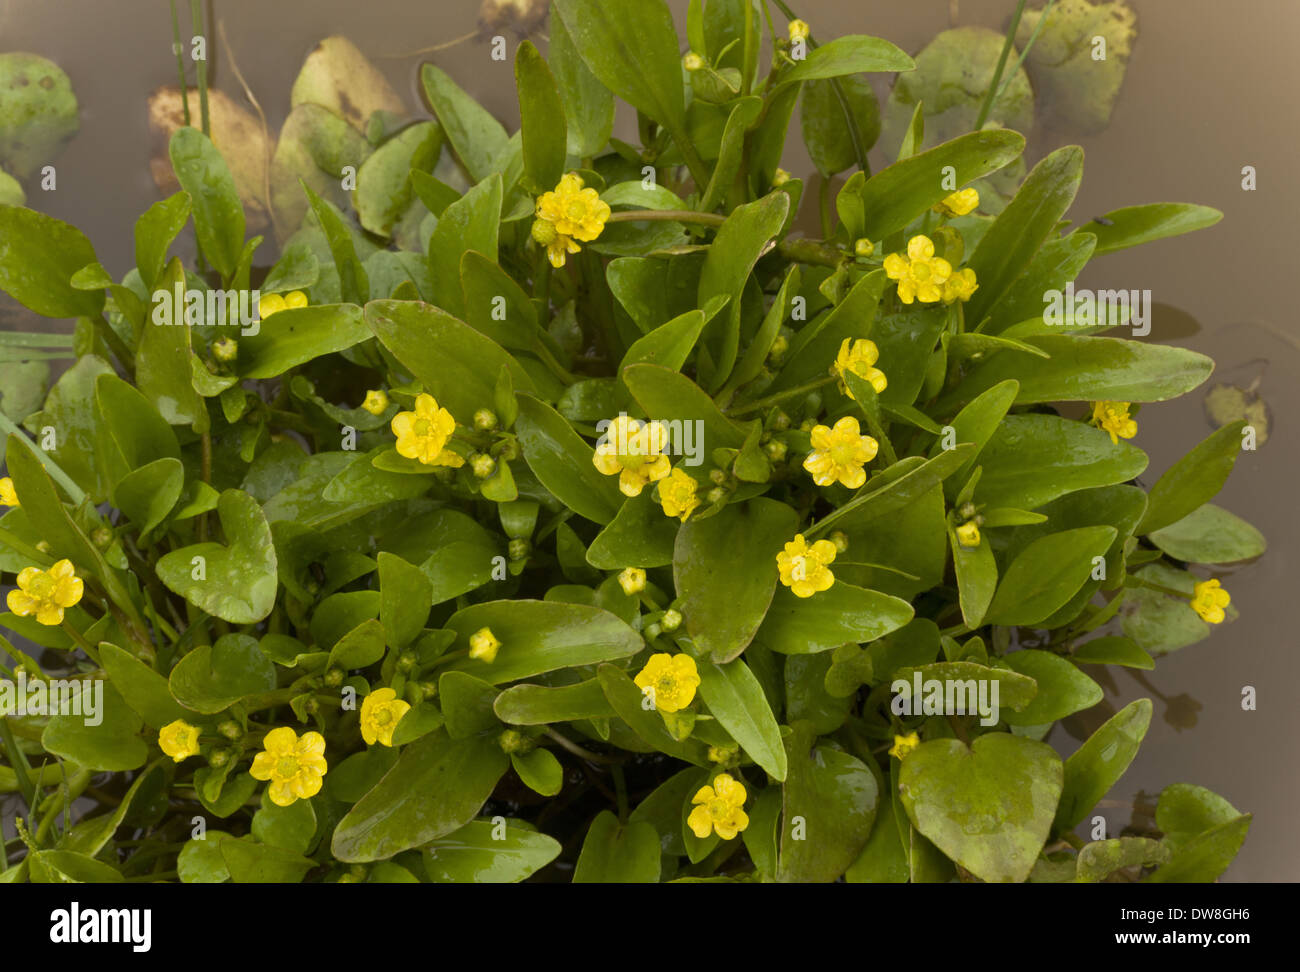 Adder's Tongue Spearwort (Ranunculus ophioglossifolius) flowering growing in standing water Sardinia Italy April Stock Photo